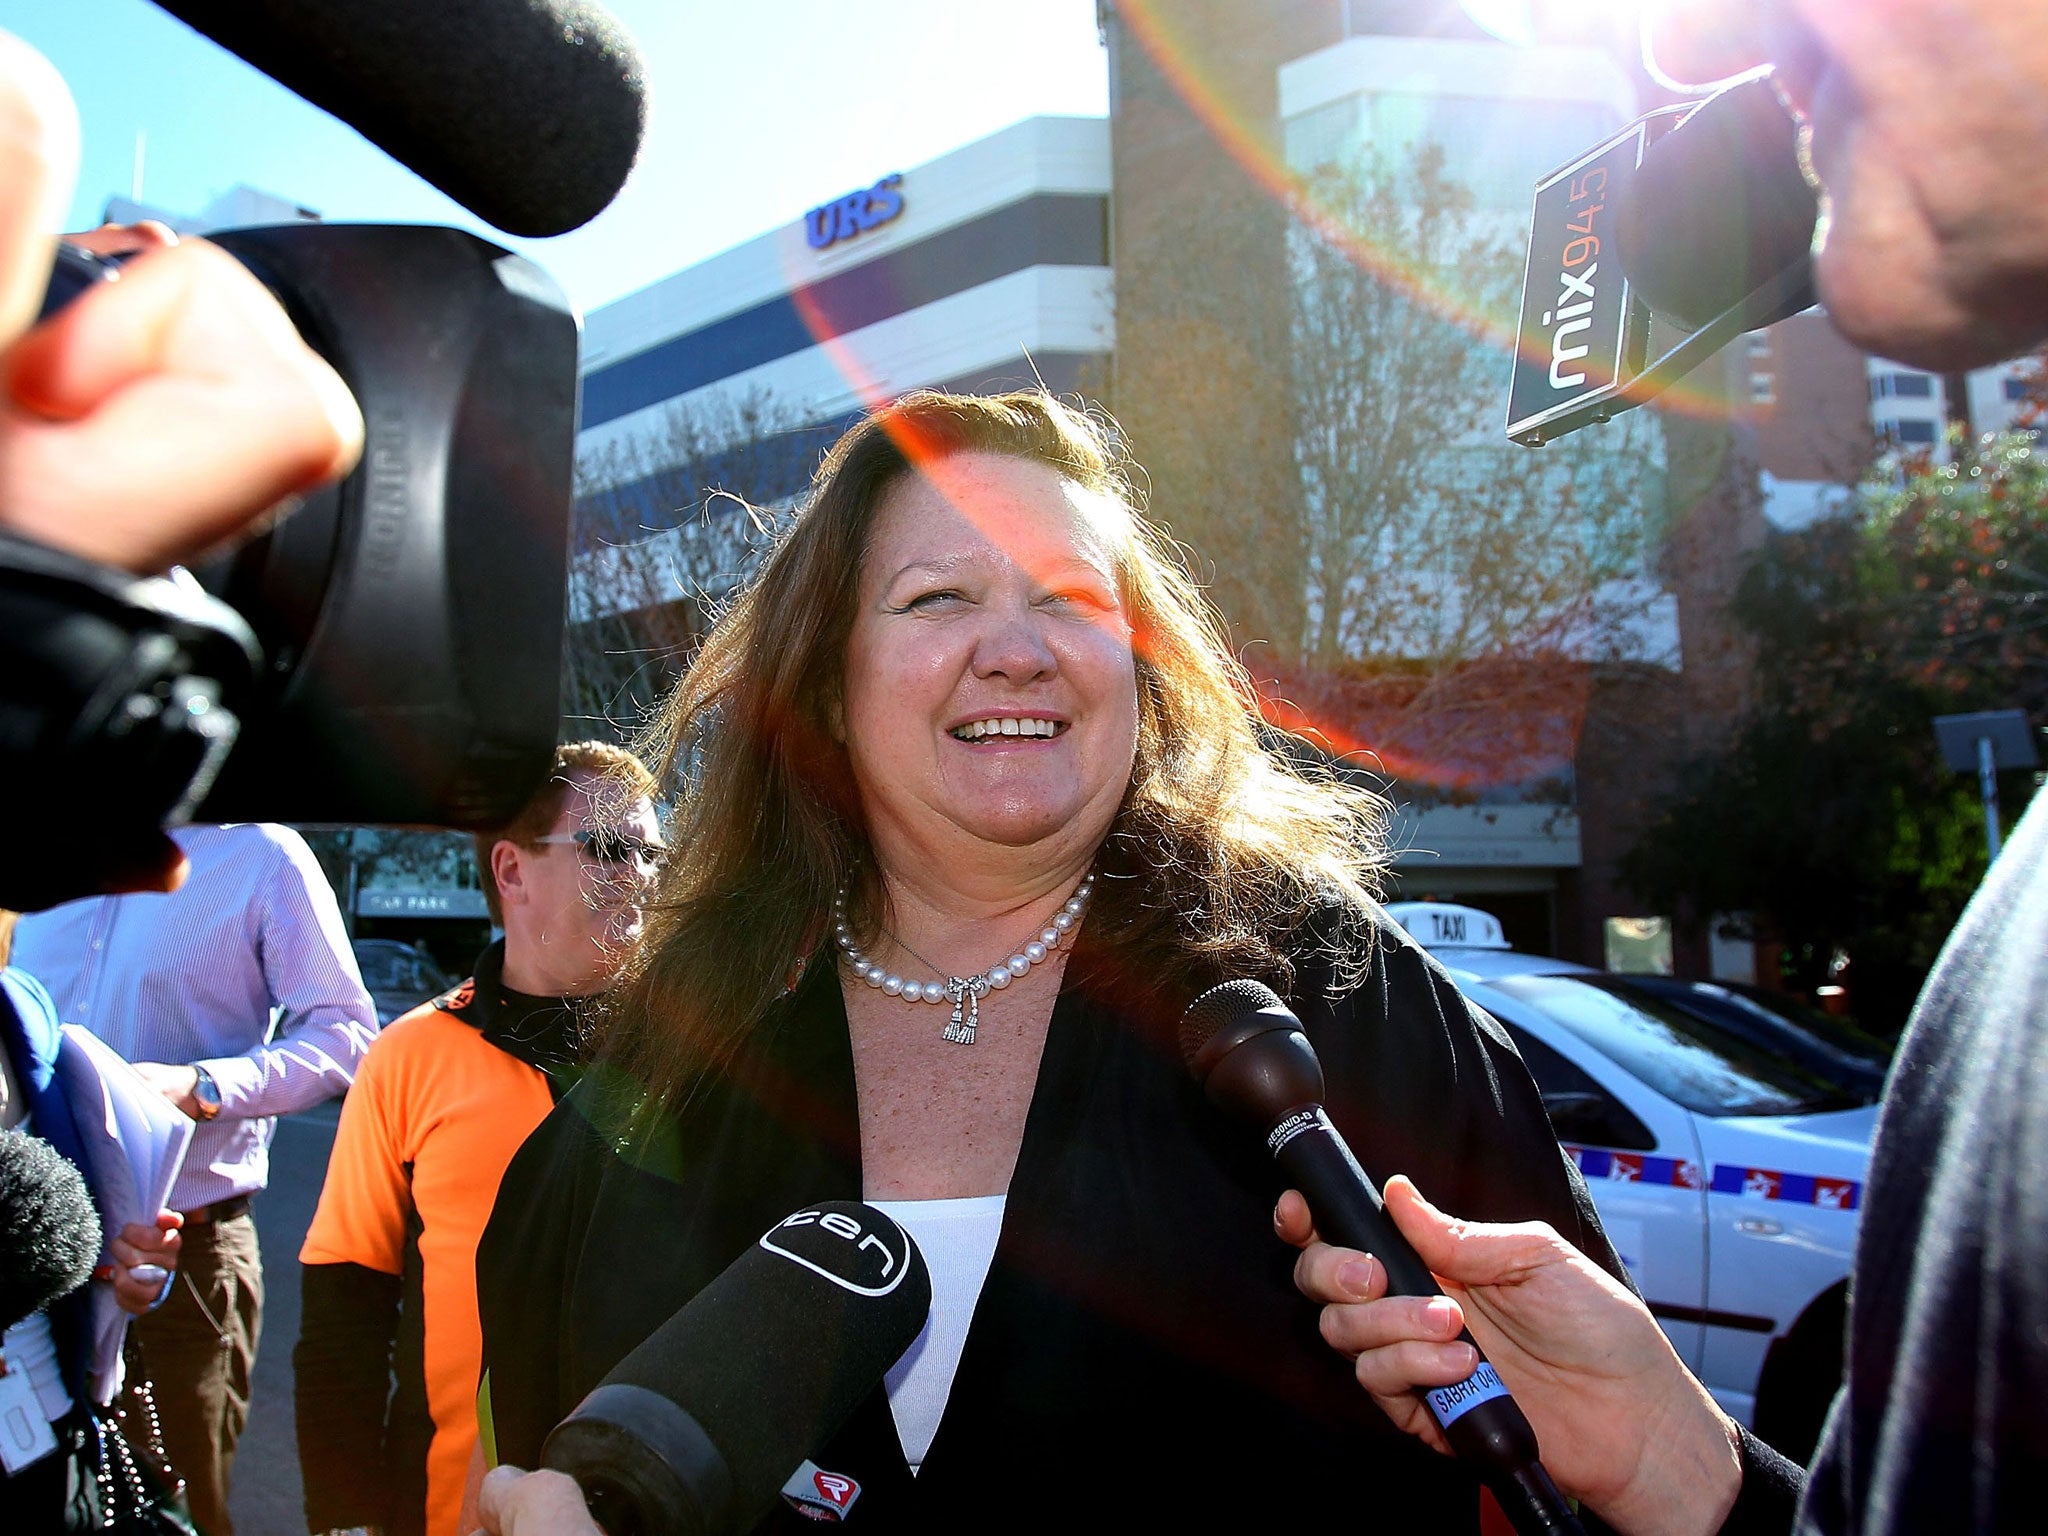 Gina Rinehart, the mining tycoon, inherited her wealth, valued at £11bn